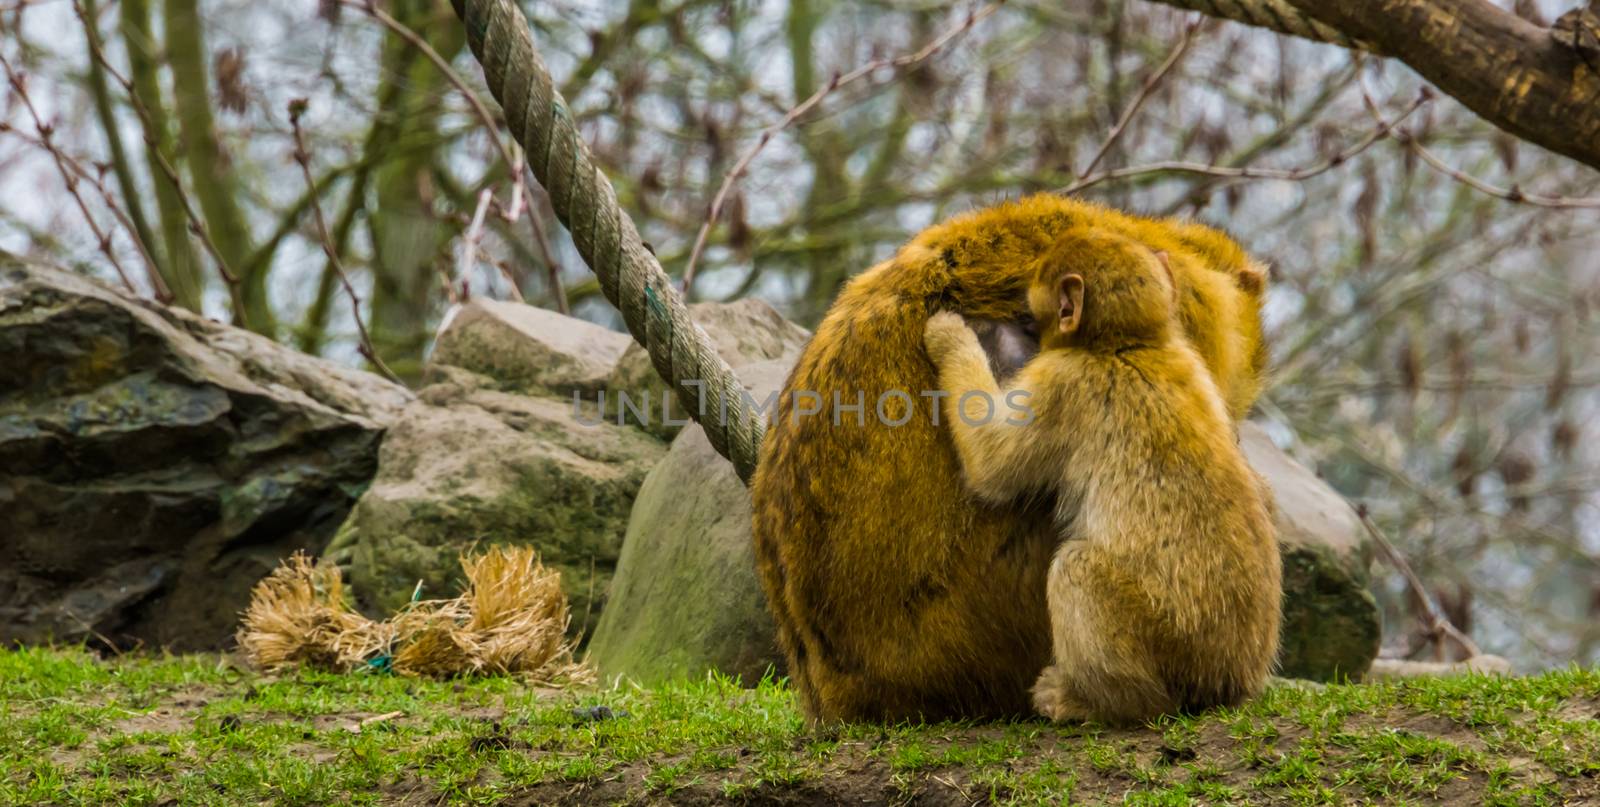 juvenile barbary macaque picking fleas from its mother, animals grooming each other, typical monkey behavior